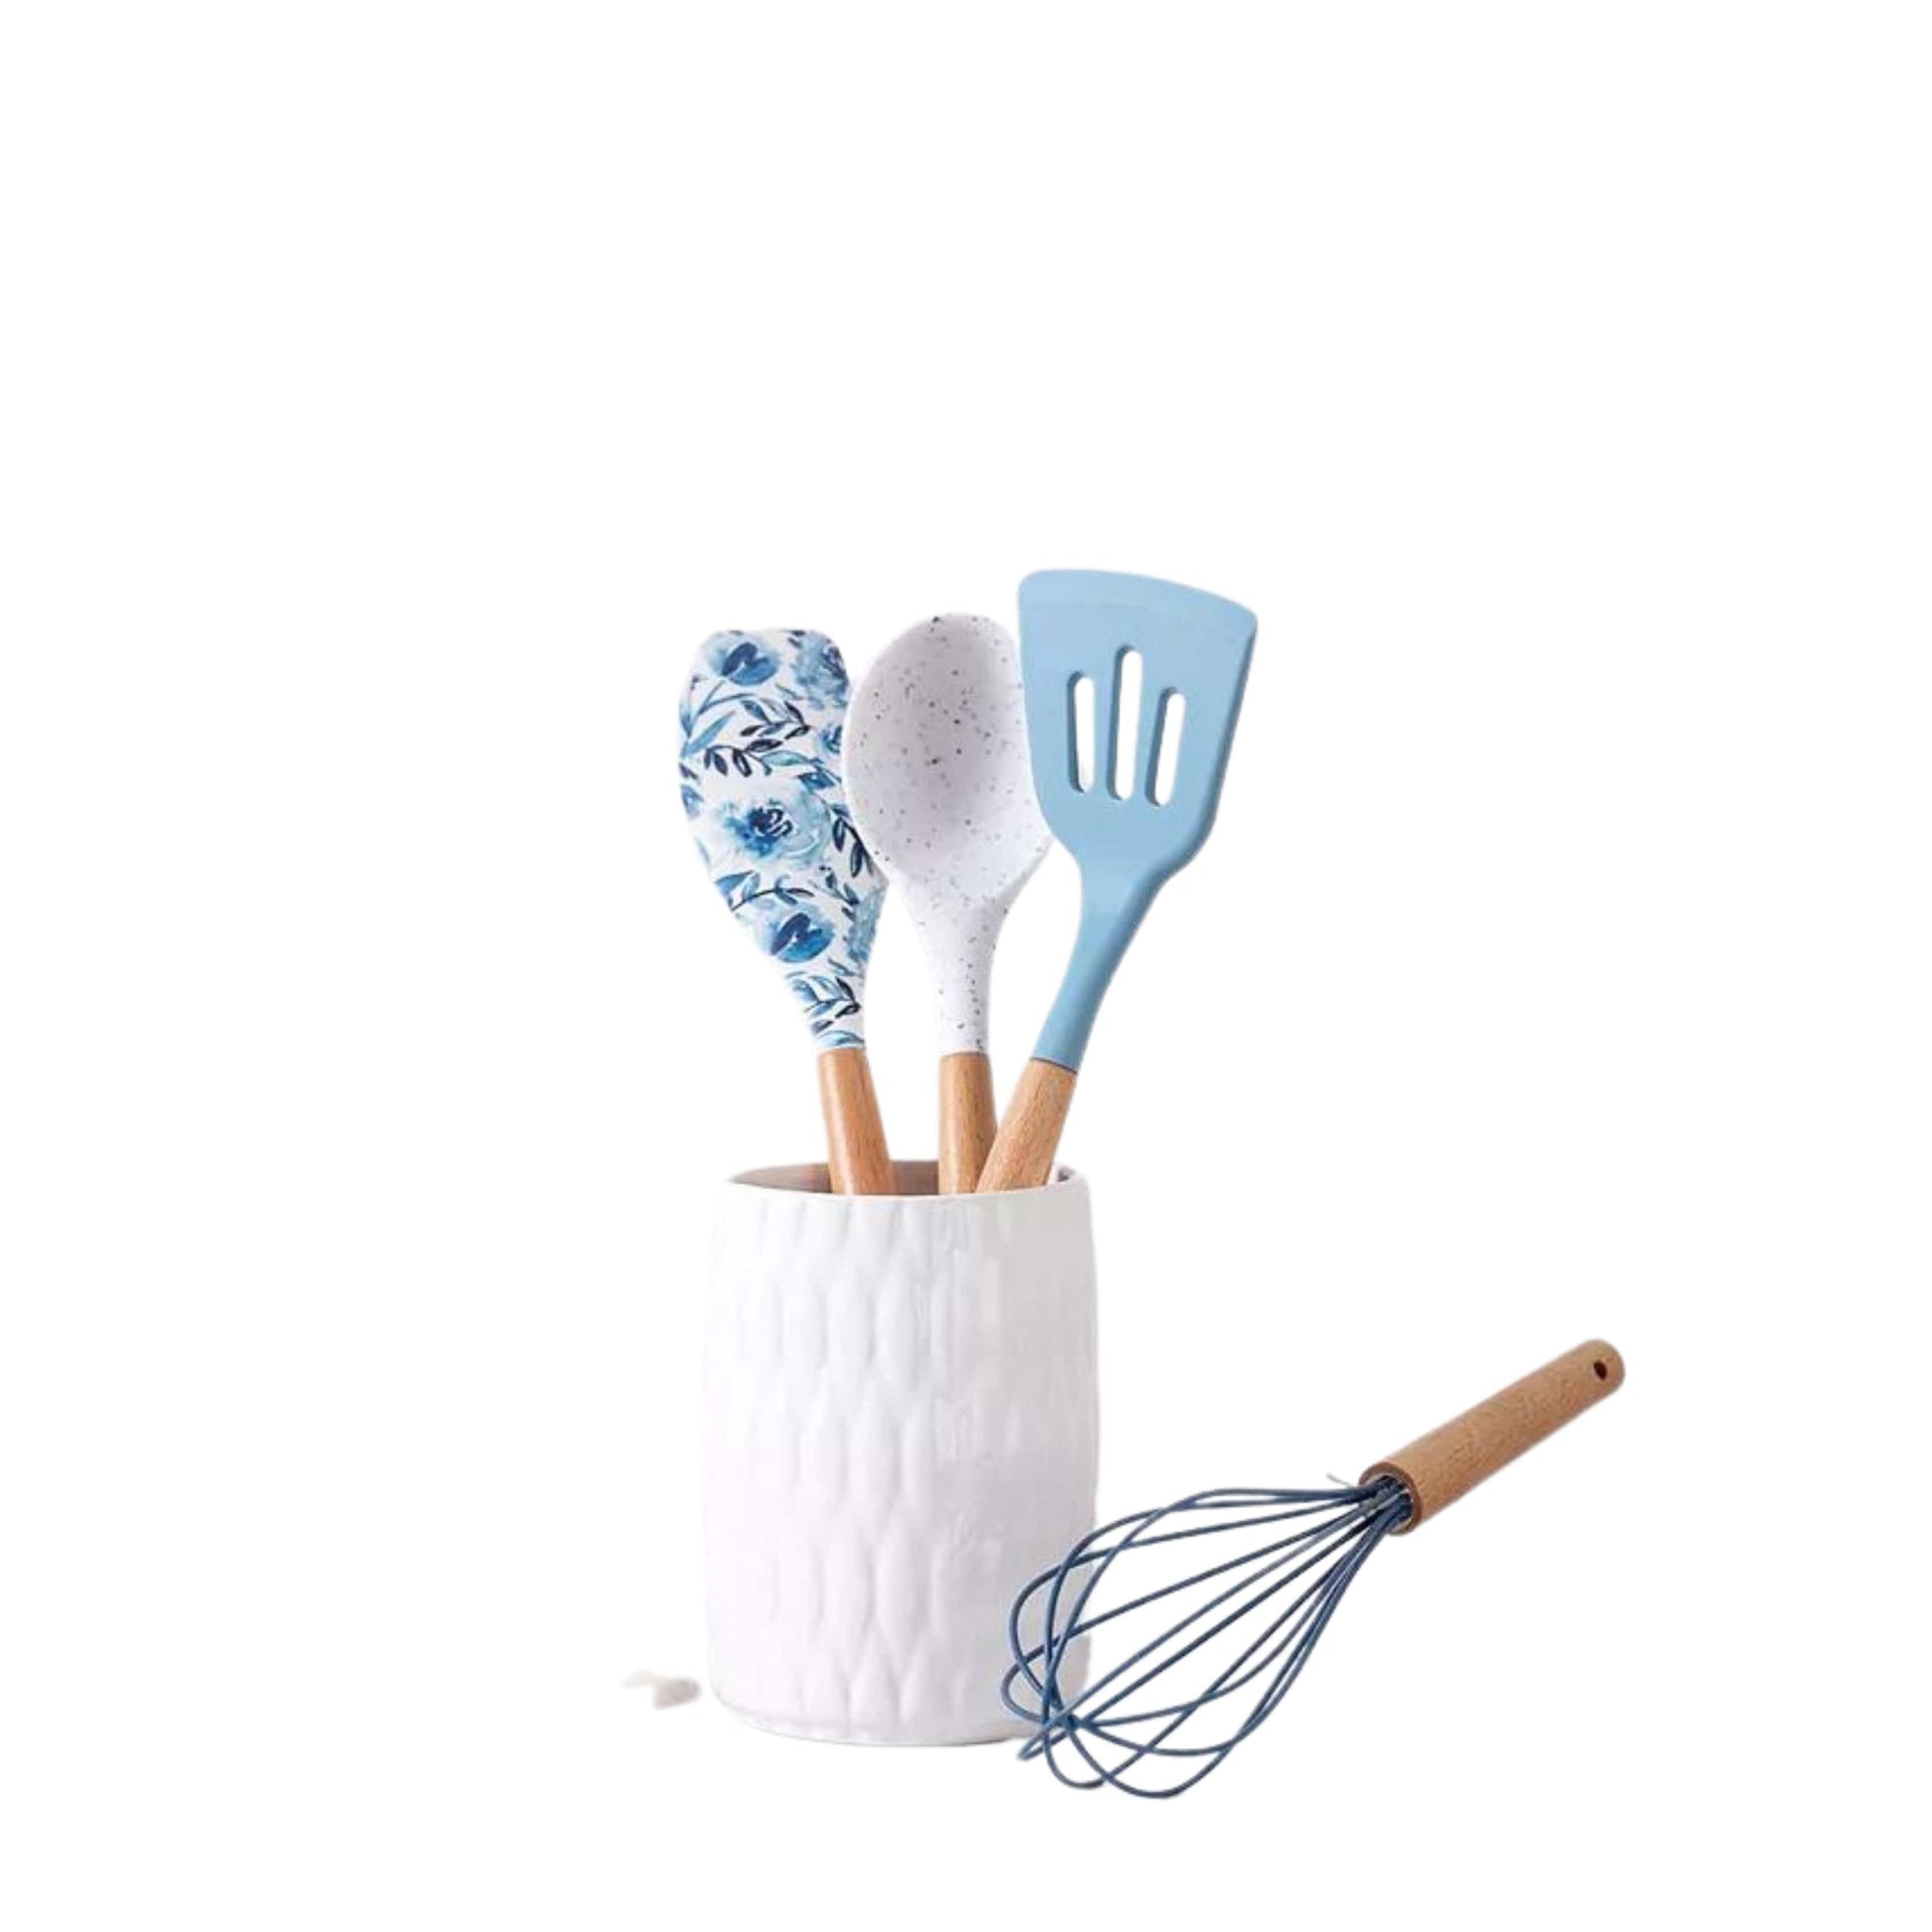 COOK WITH COLOR Kitchenware Multi-Color COOK WITH COLOR  -  5-Pc. Nylon Utensil Set & Crock